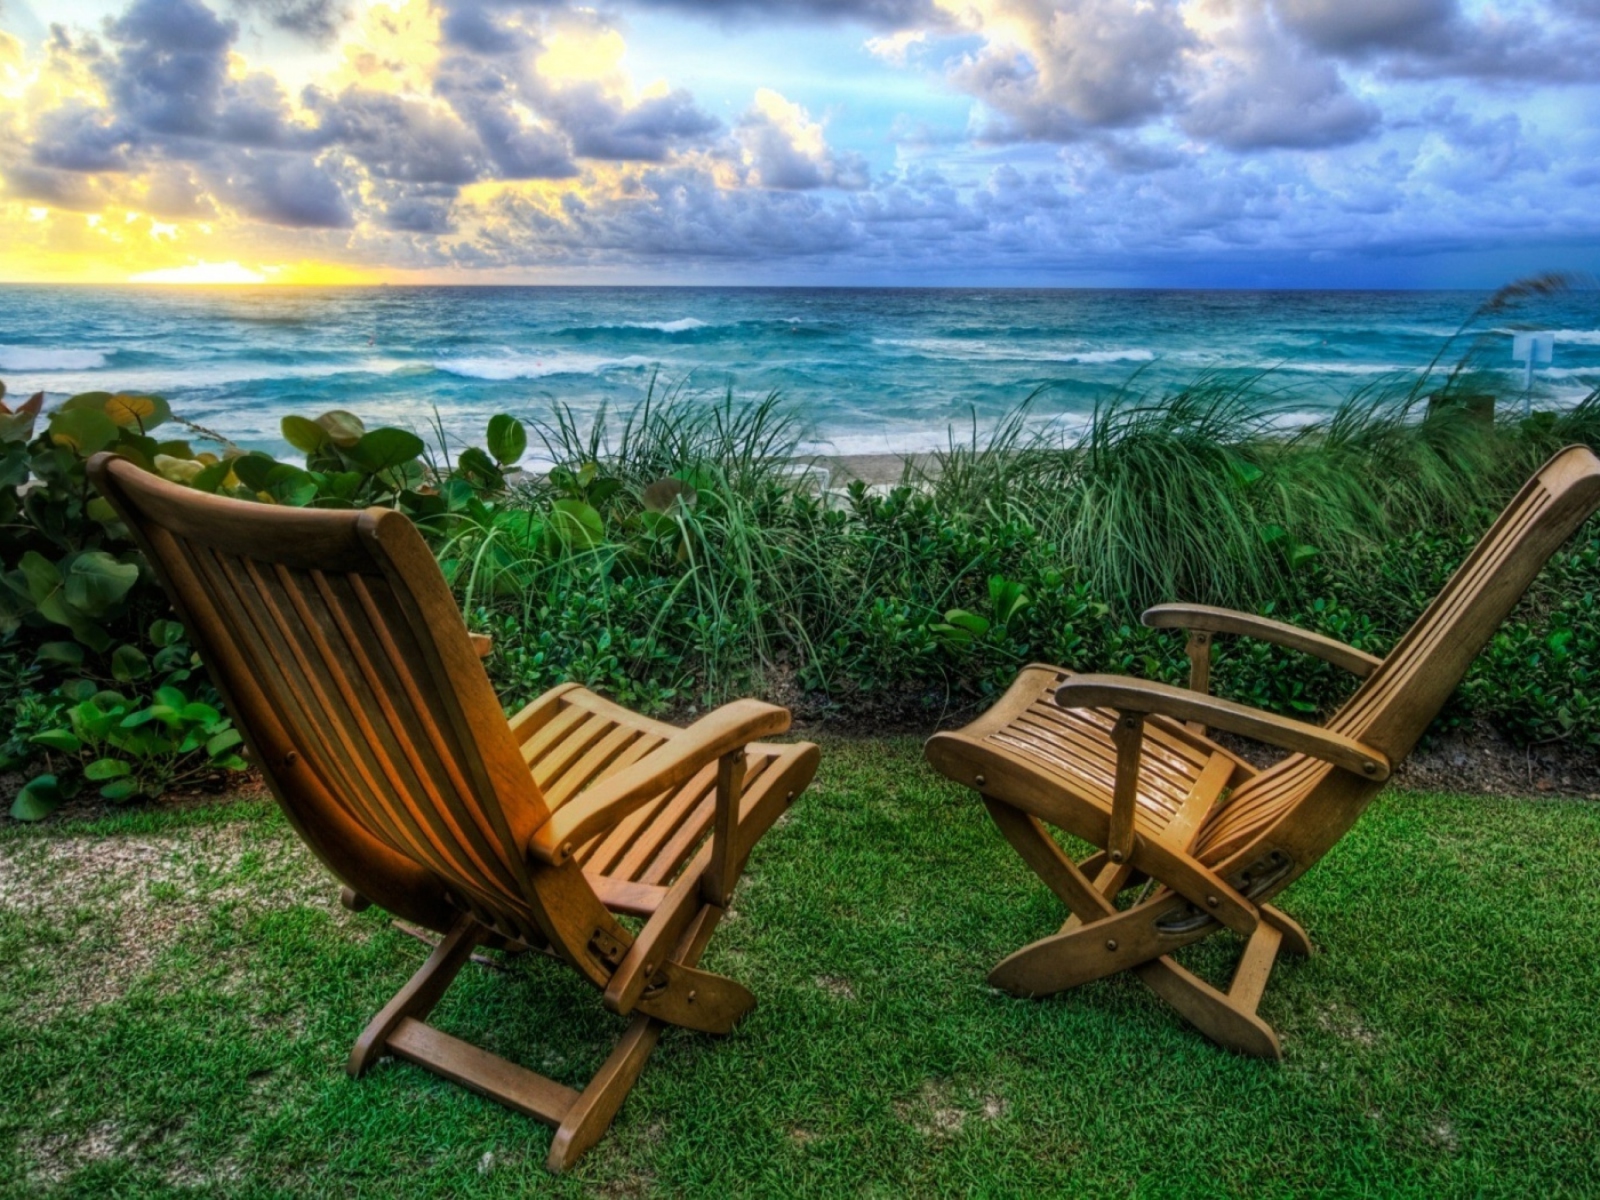 Chairs With Sea View wallpaper 1600x1200